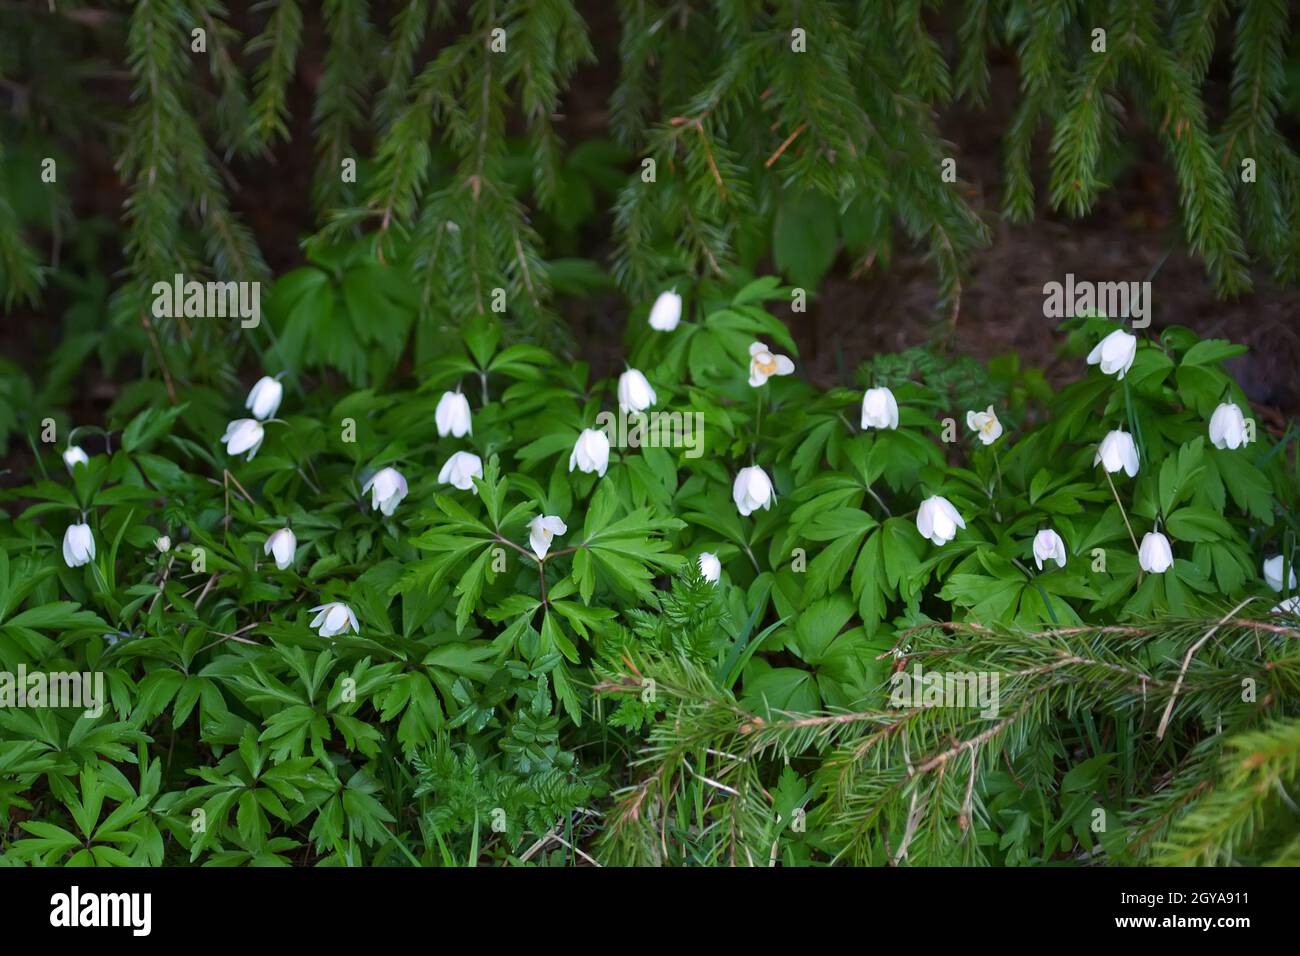 A curtain of flowering anemones in the northern forest under the canopy of a fir tree Stock Photo